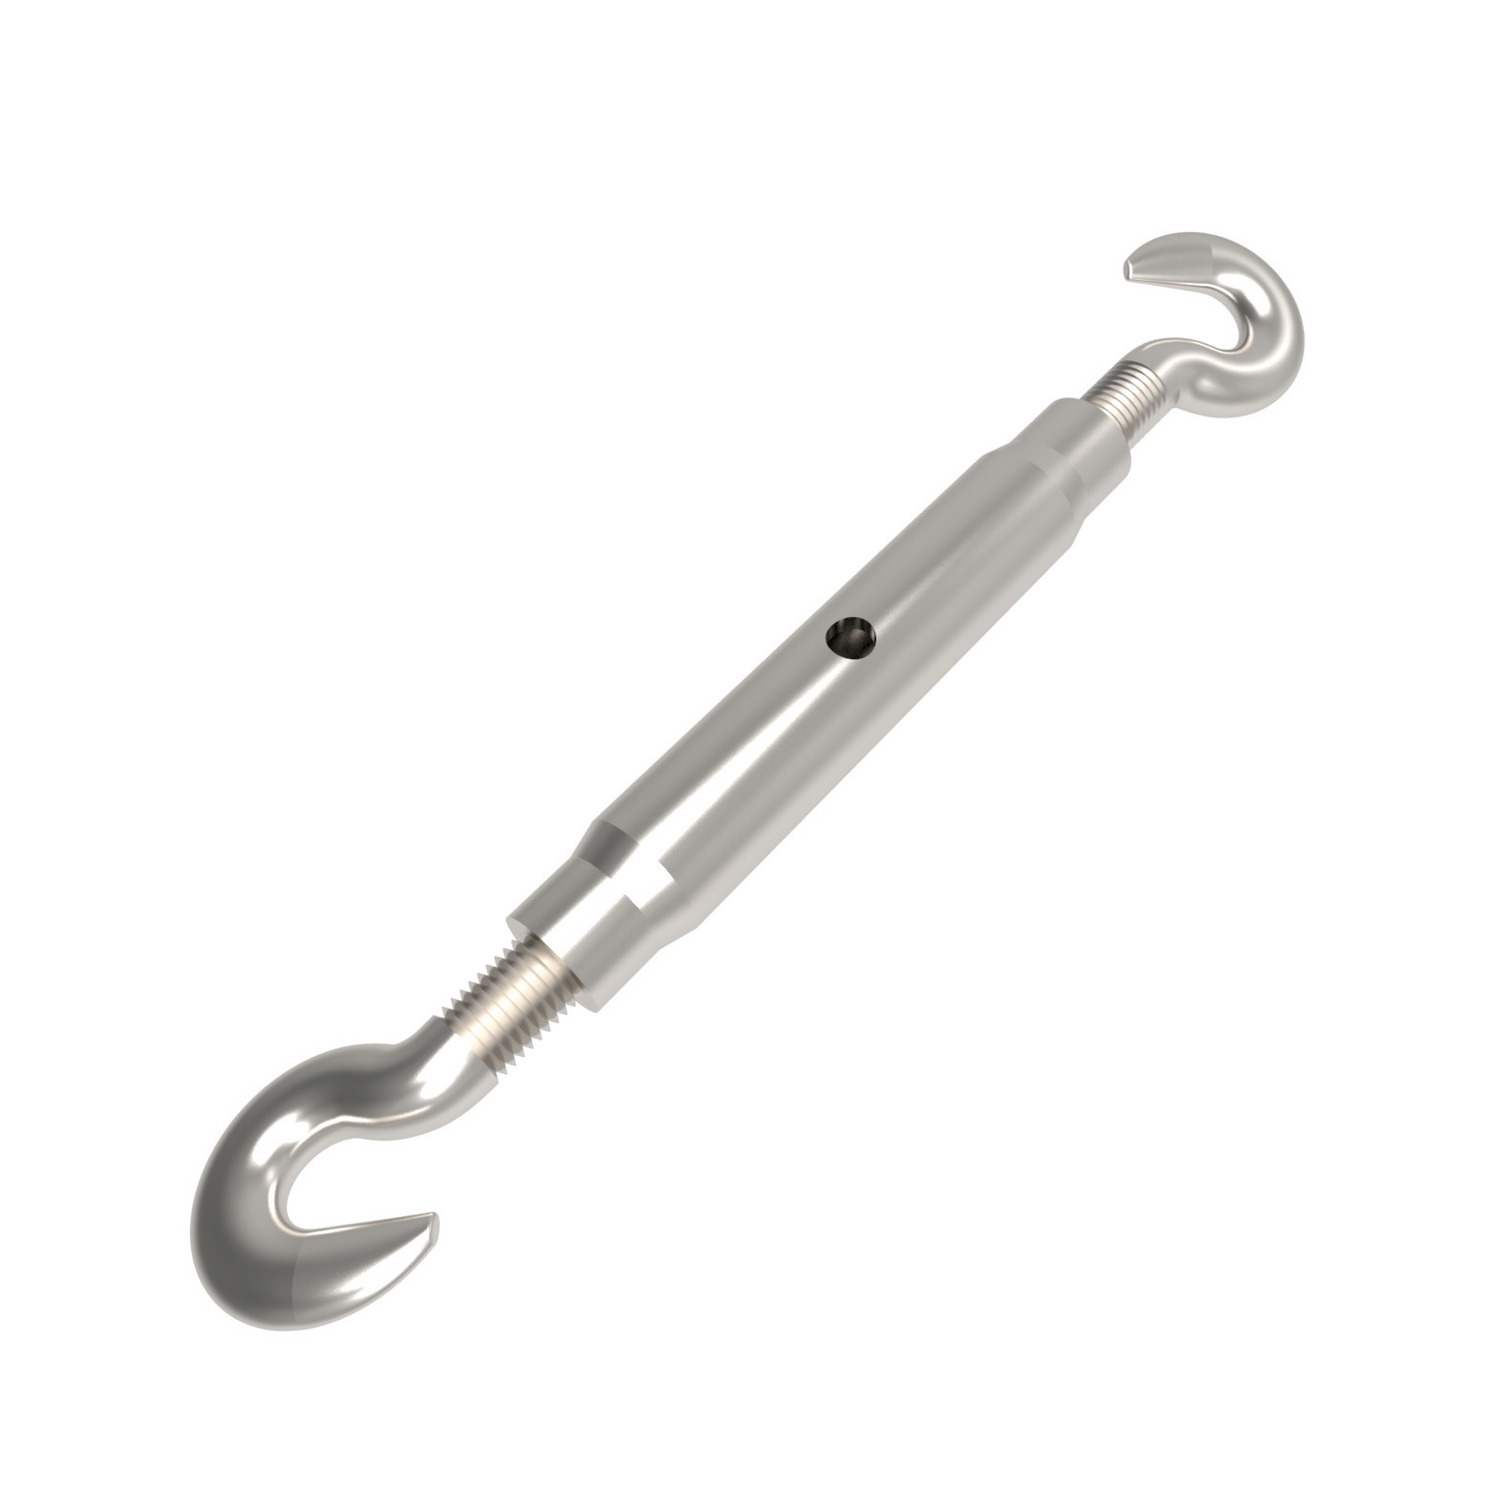 Hook End Pipe Body Turnbuckles A4 Stainless steel turnbuckles, hook to hook. Manufactured to DIN 1478. Sizes ranging from M6 to M16. Lengths from 110mm to 170mm.